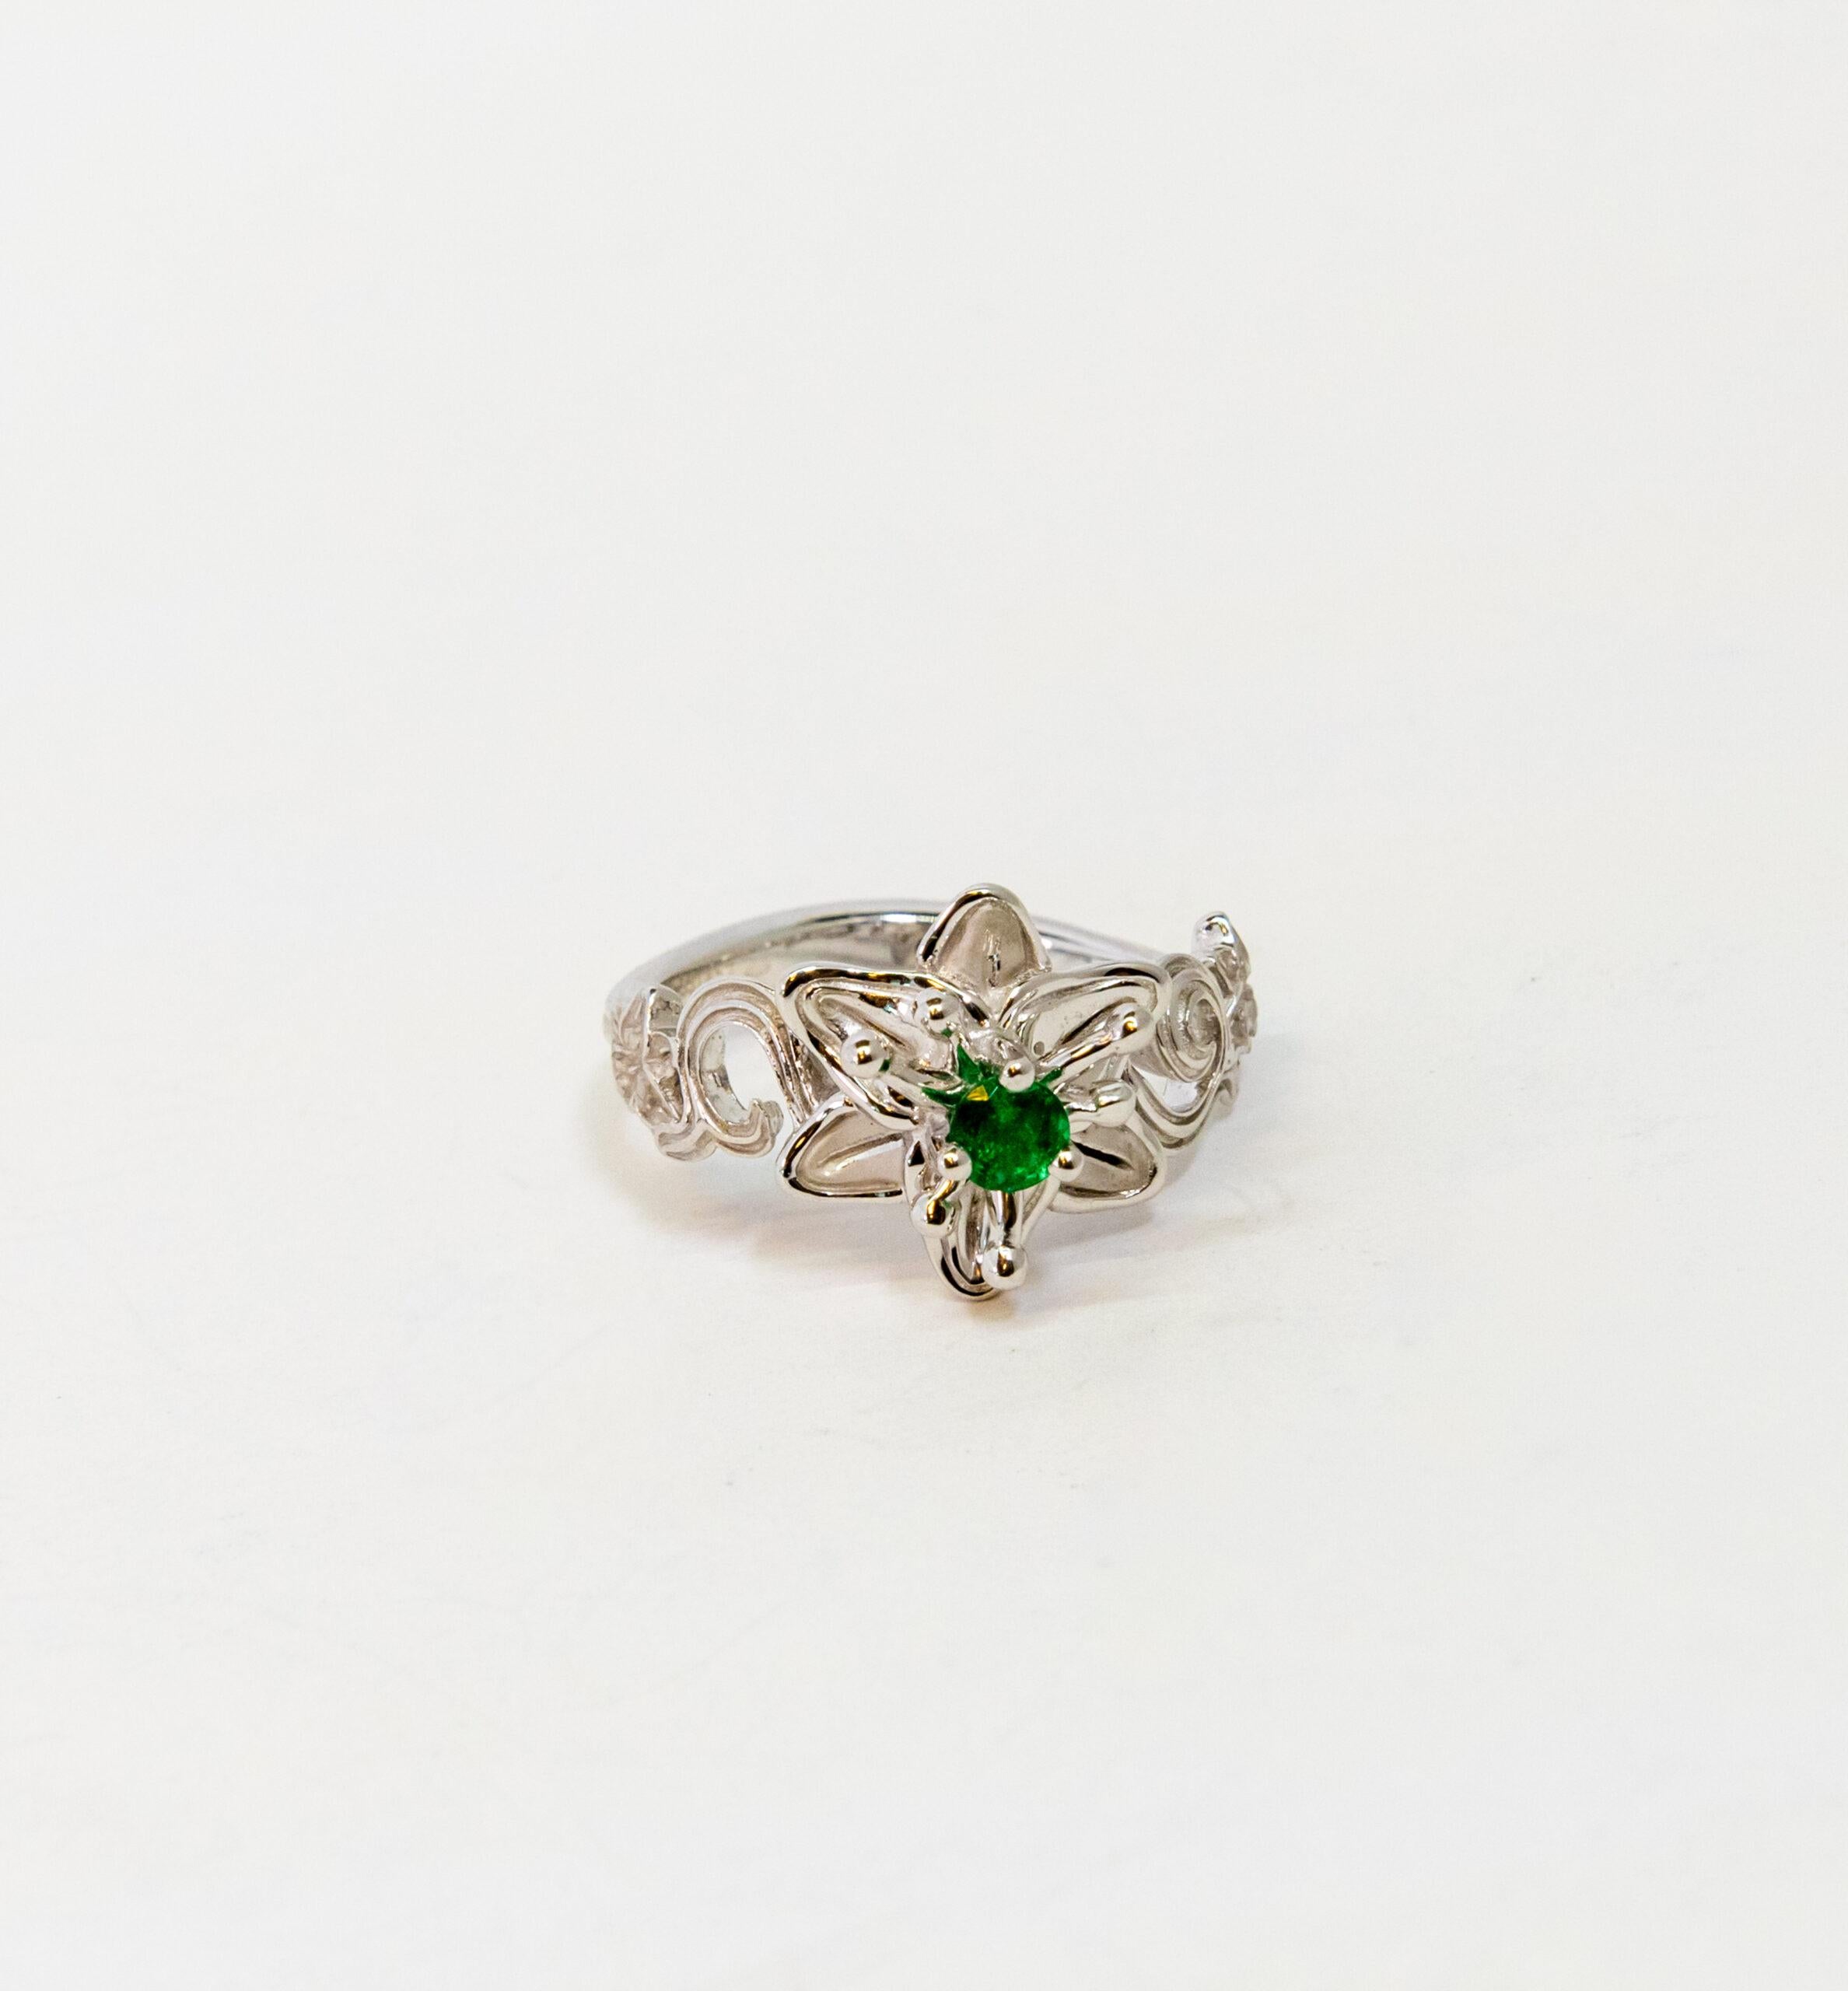 This ring is made of 18K White Gold. It is decorated as floral pattern with a round-cut Emerald (~0.21).

Size – 54.5 (7 US)